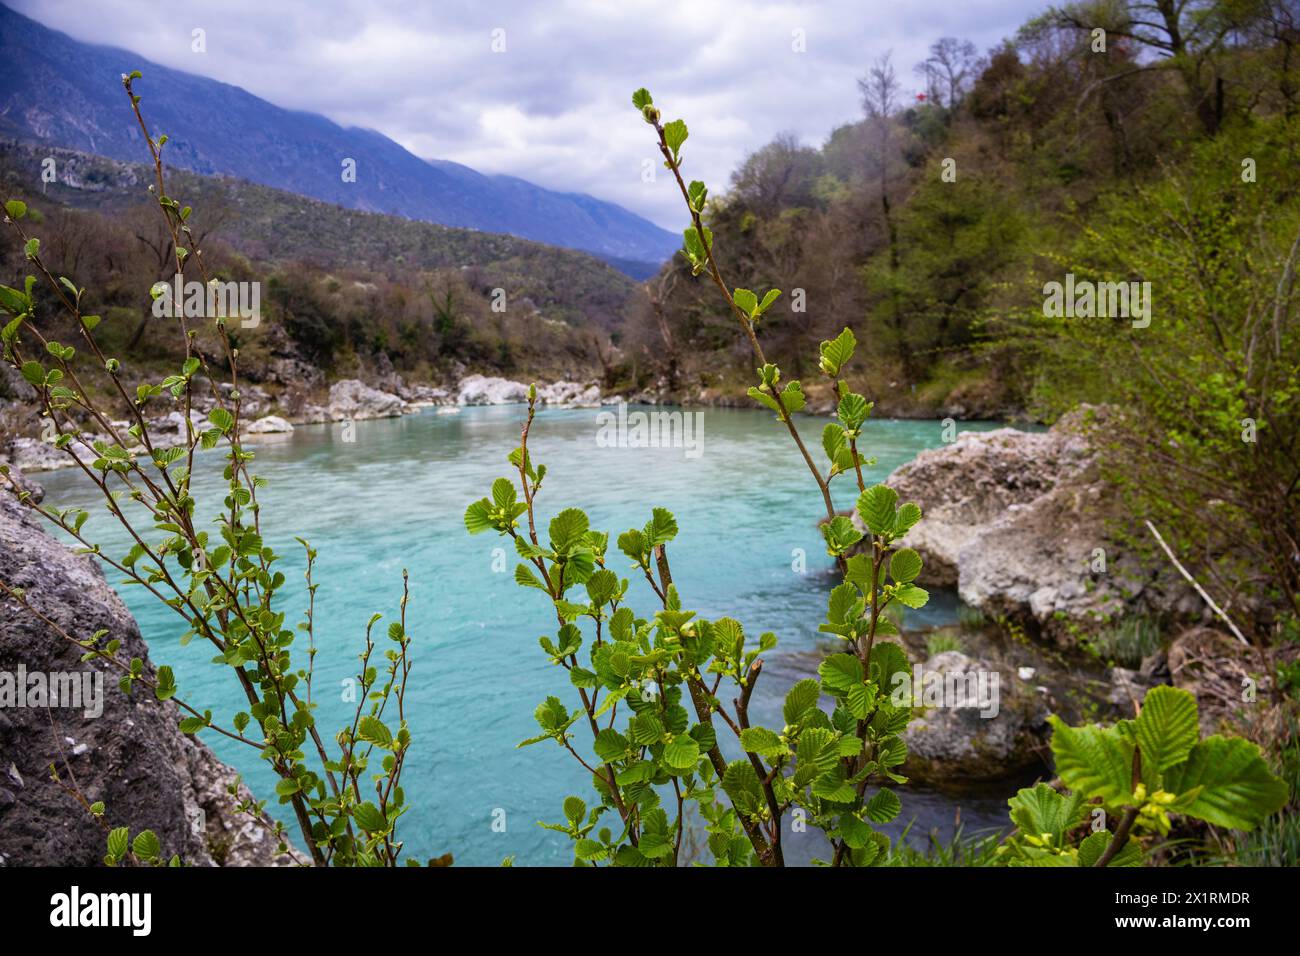 Riverside view with green leaves over mountains Stock Photo